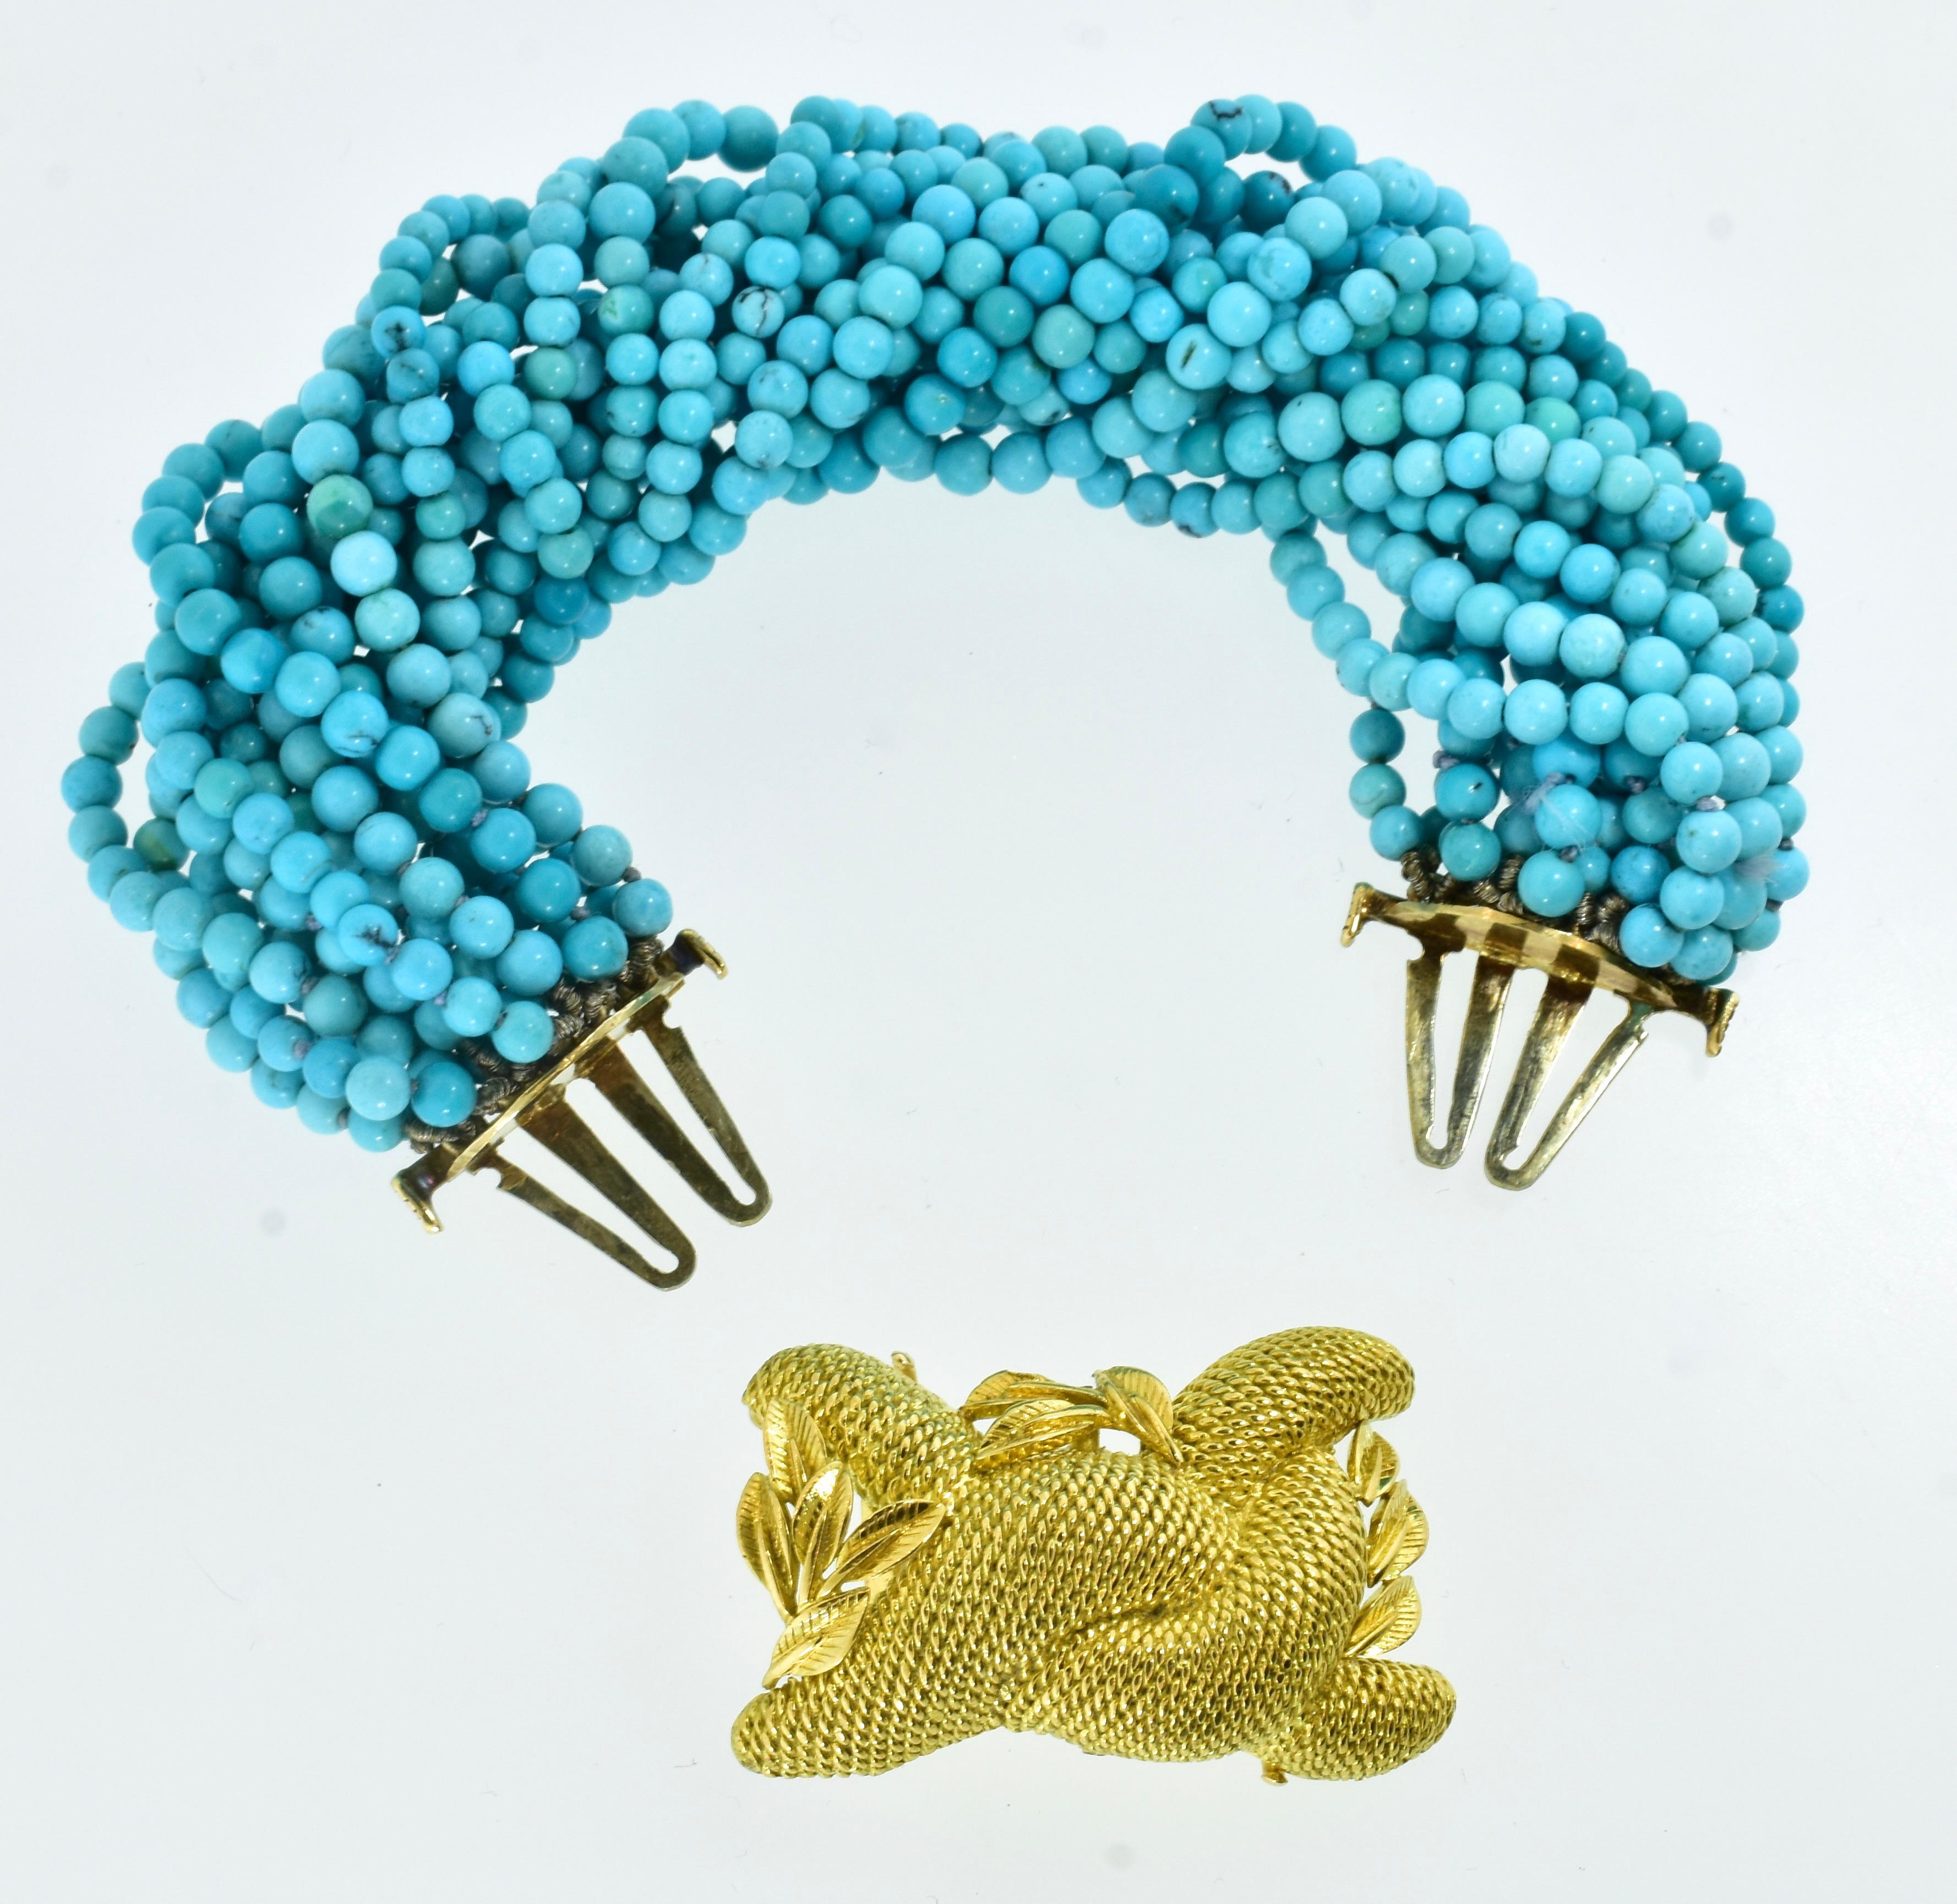 Fine Turquoise Bead Torsade Bracelet Centering an 18K High Relief Clasp, c. 1965 For Sale 1